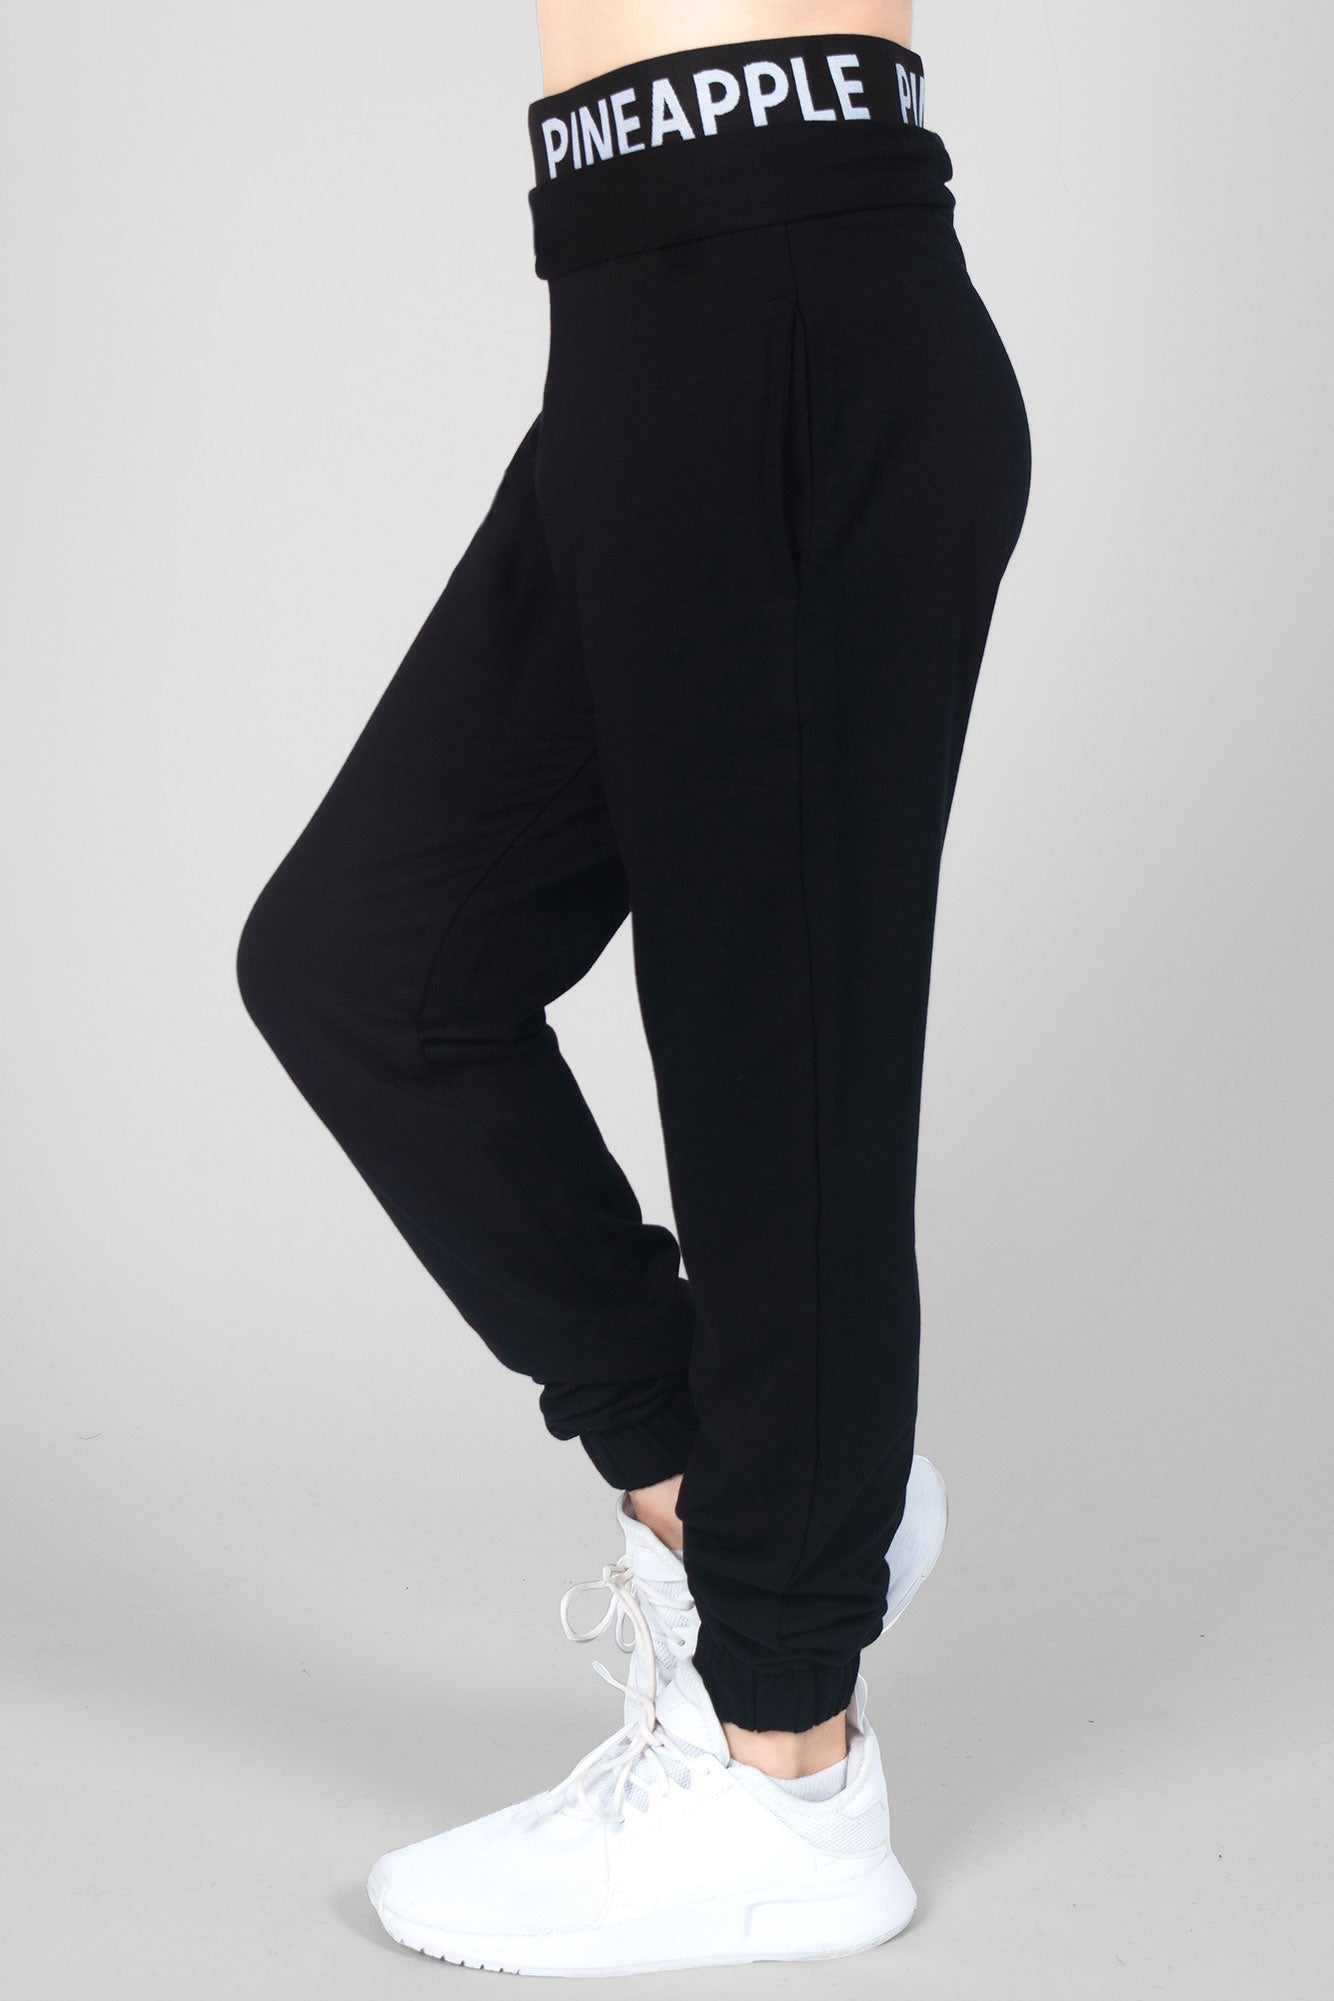 Black Typographic Print Track Pants with Insert Pockets